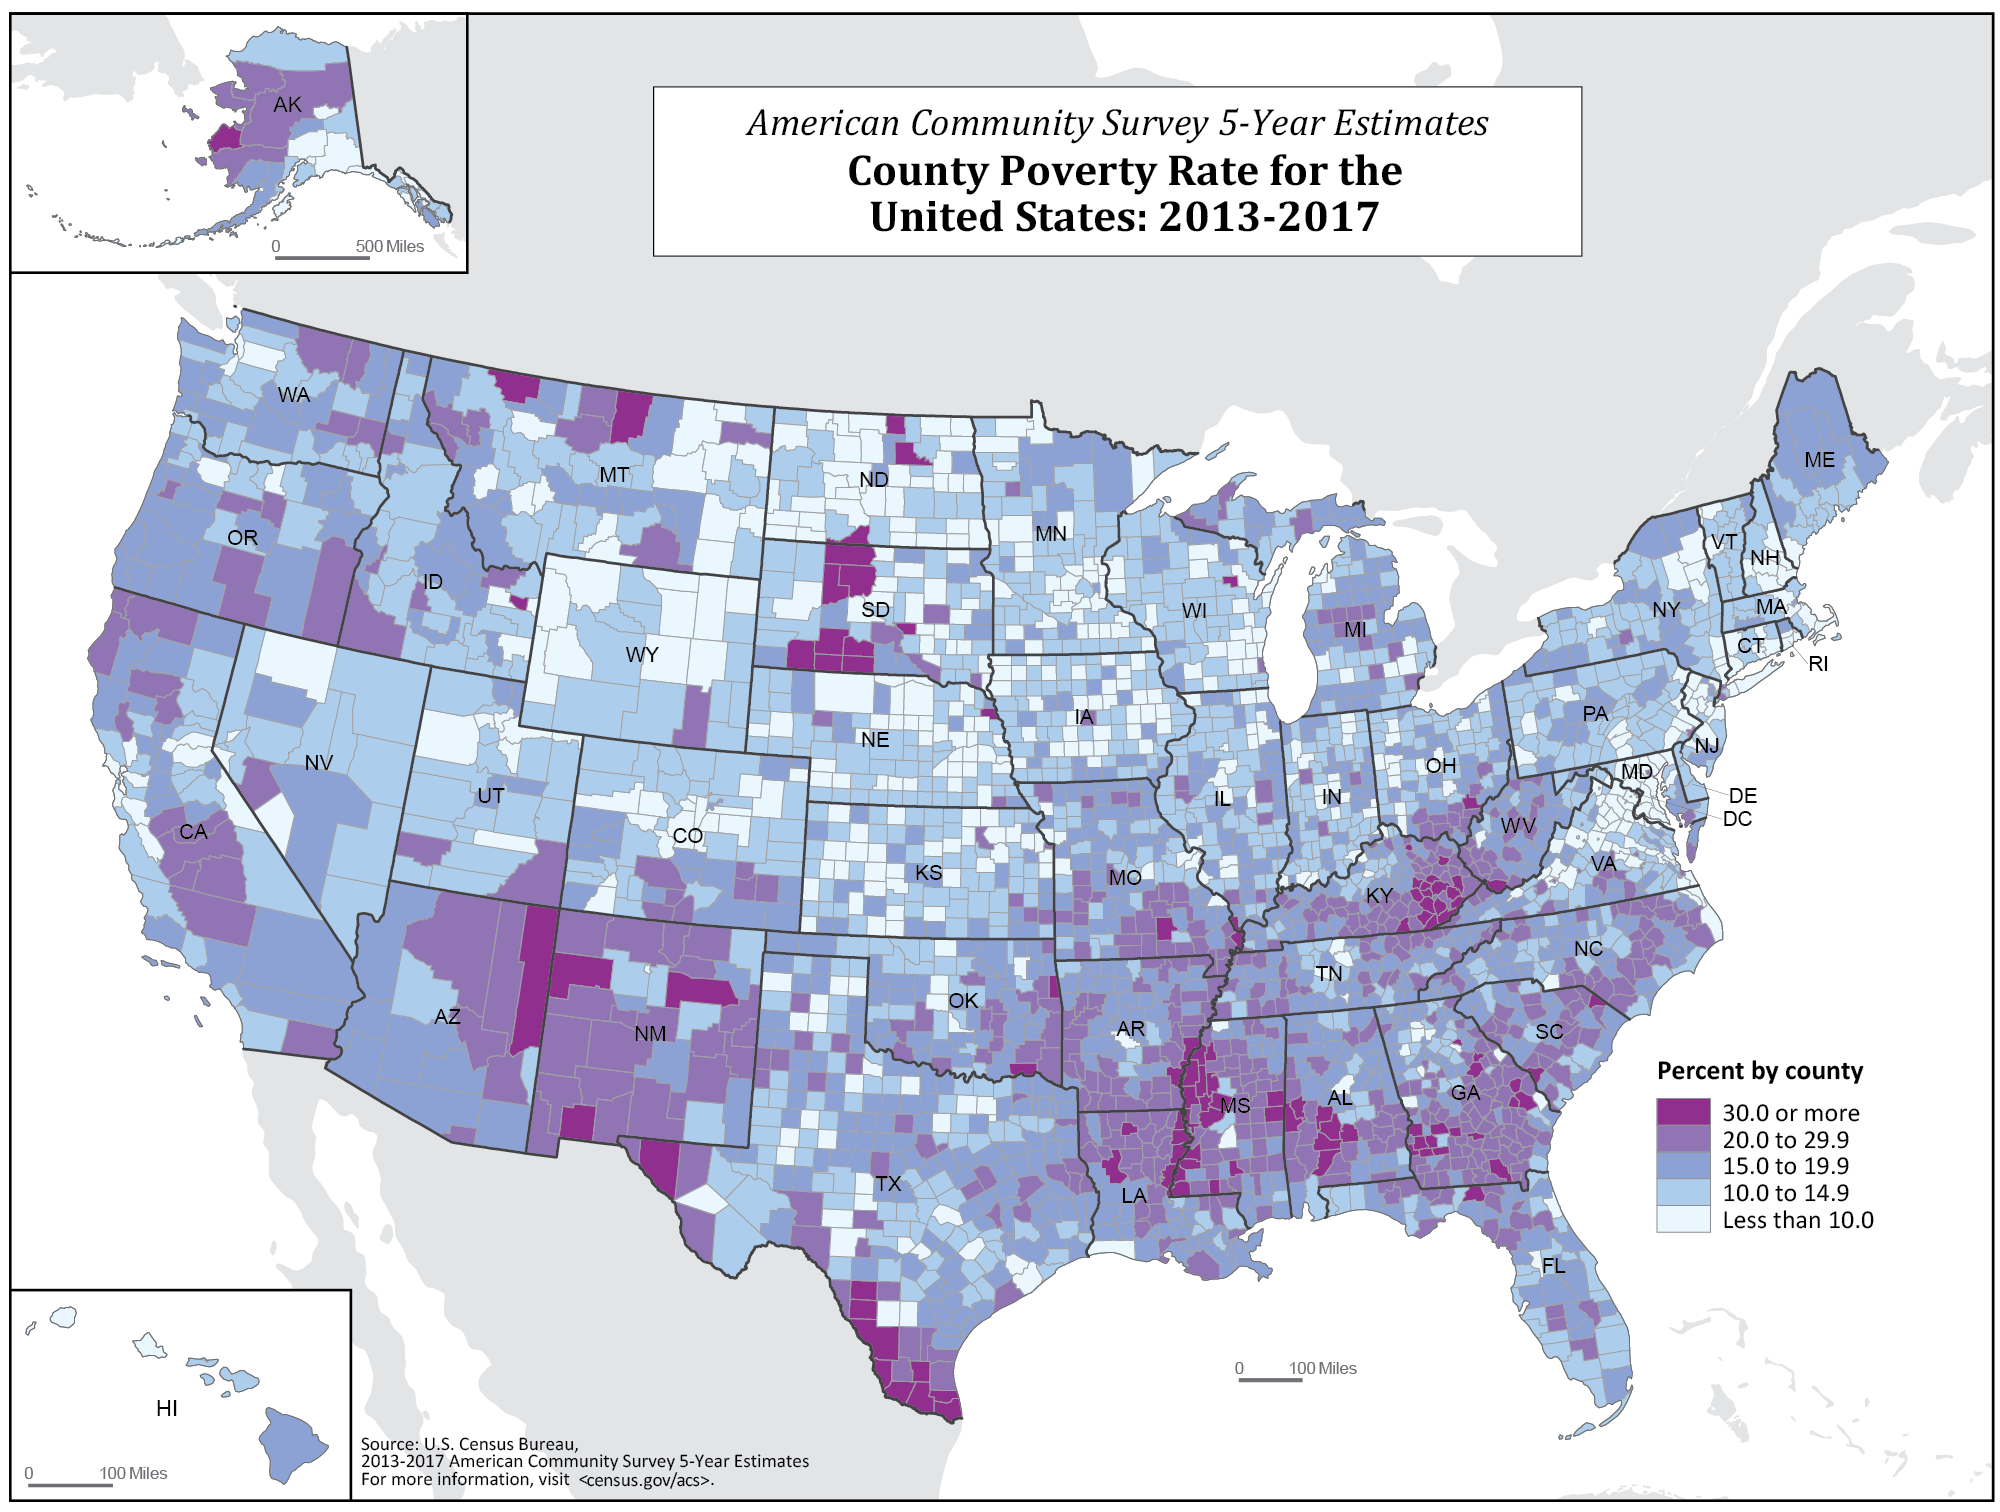 differences-in-income-growth-across-united-states-counties-figure-03-large.png